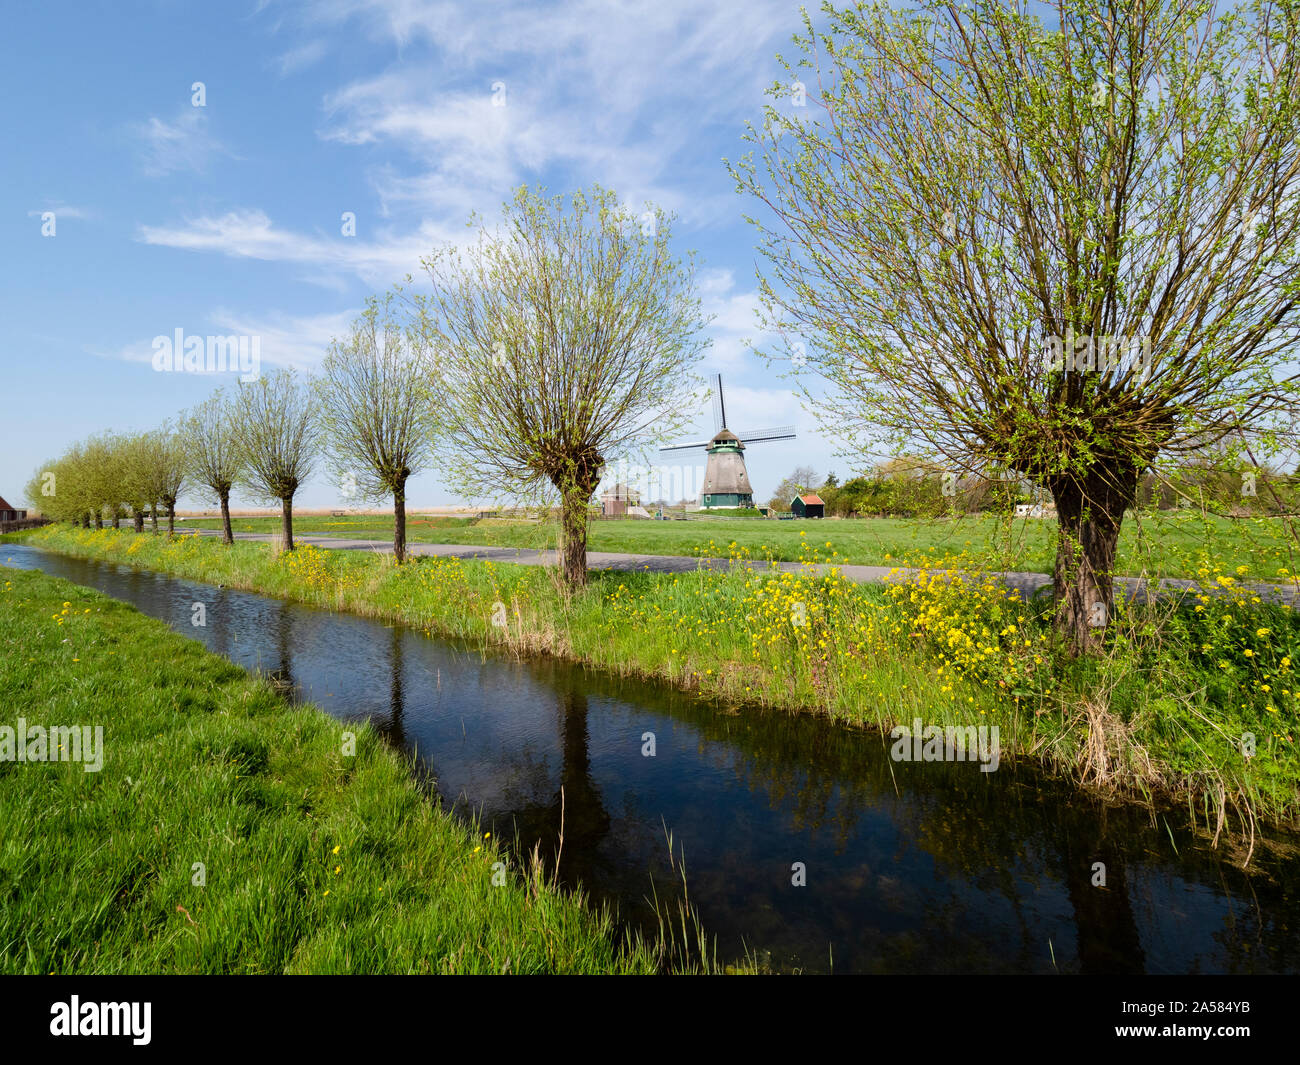 Rural scene with treelined canal, road and windmill, Dijkjweg, Hoogwoud, North Holland, Netherlands Stock Photo